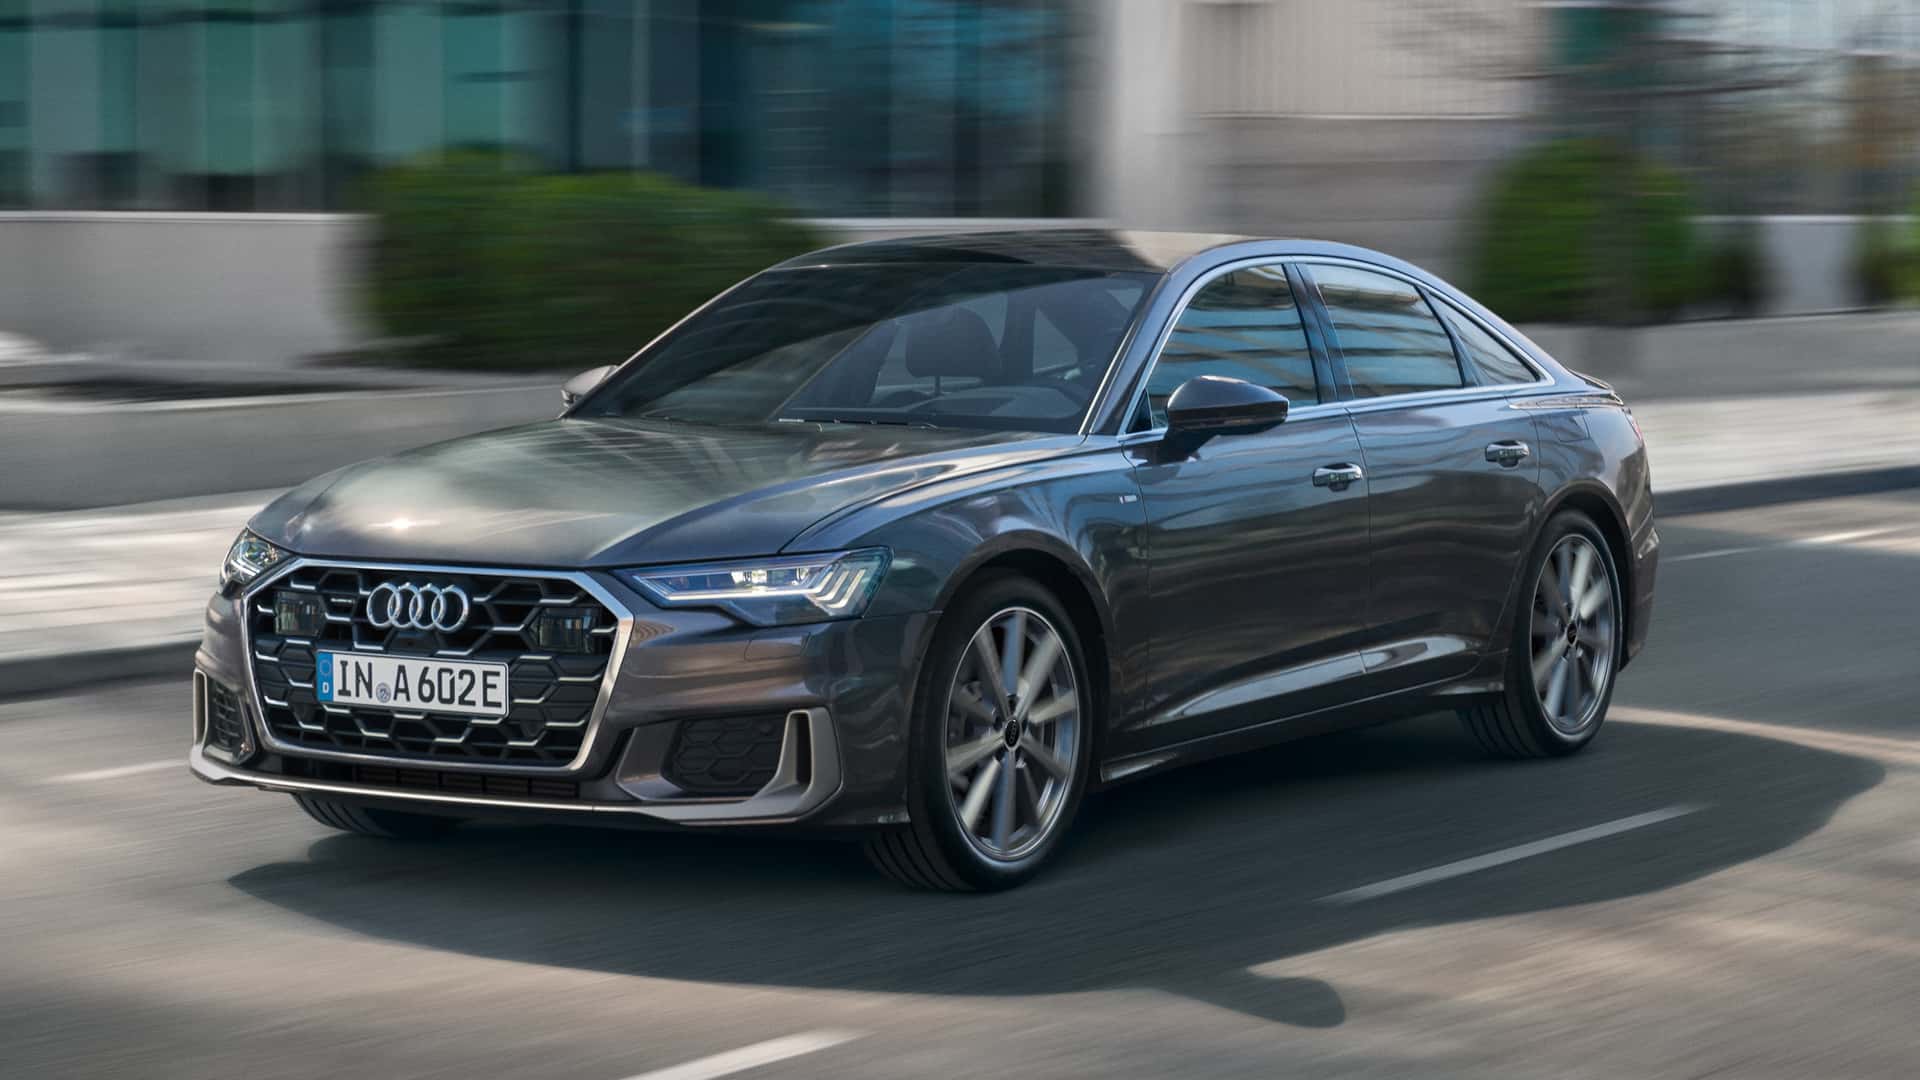 Audi To Launch A6 Facelift Next Year In India